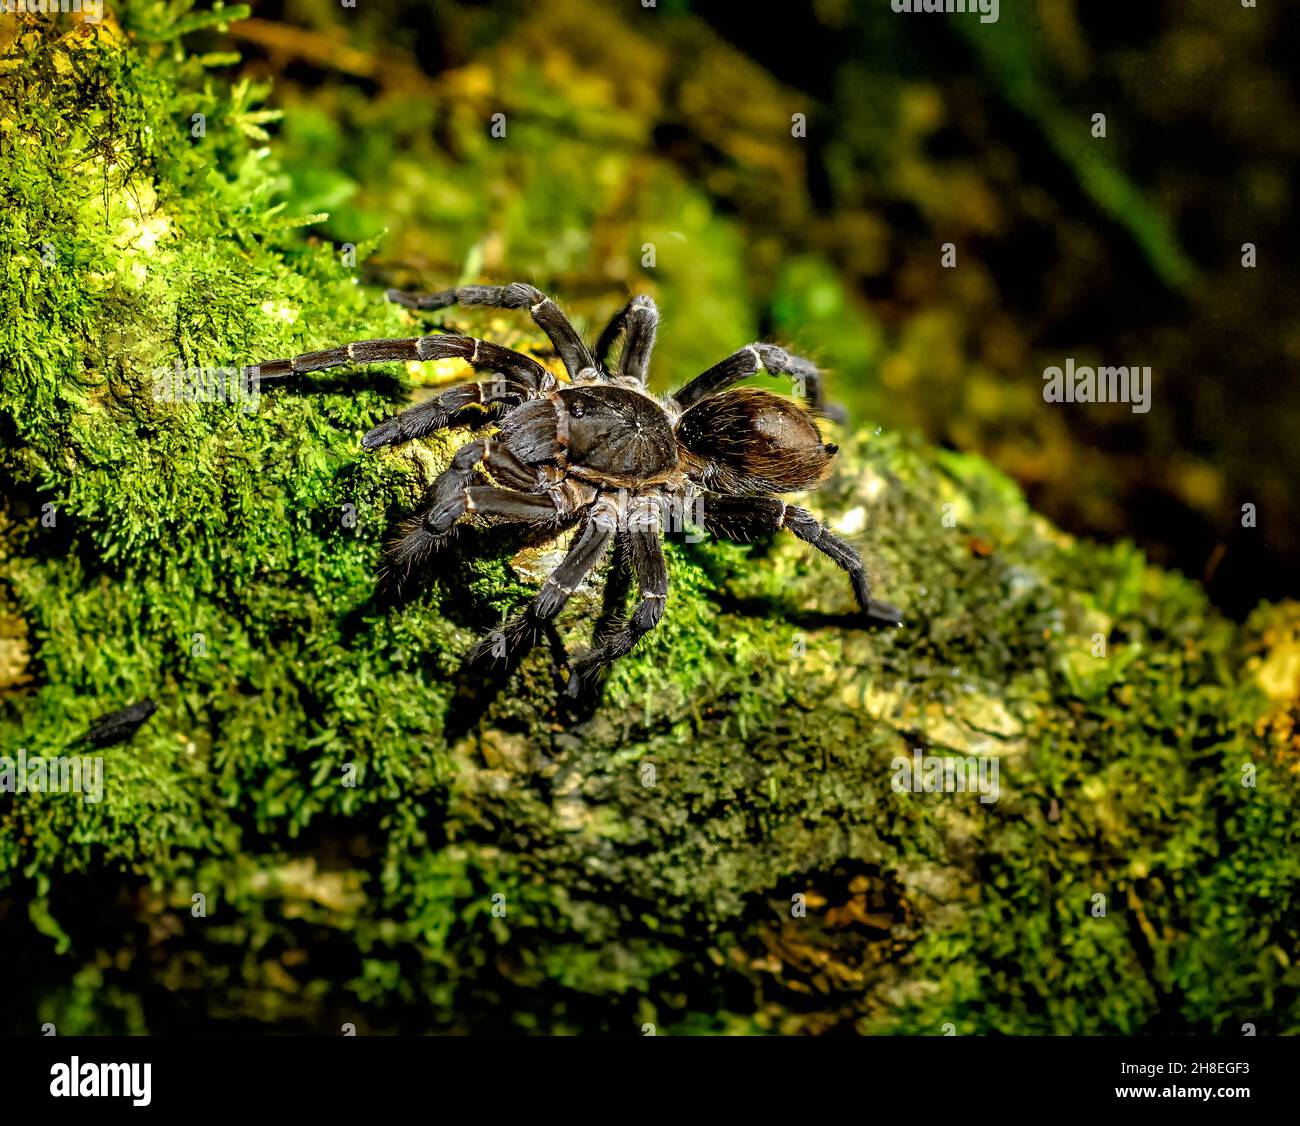 The Amazonian Tarantulas are the largest spiders in the world, this one photographed during a night walk in the Amazon Rain Forest Stock Photo